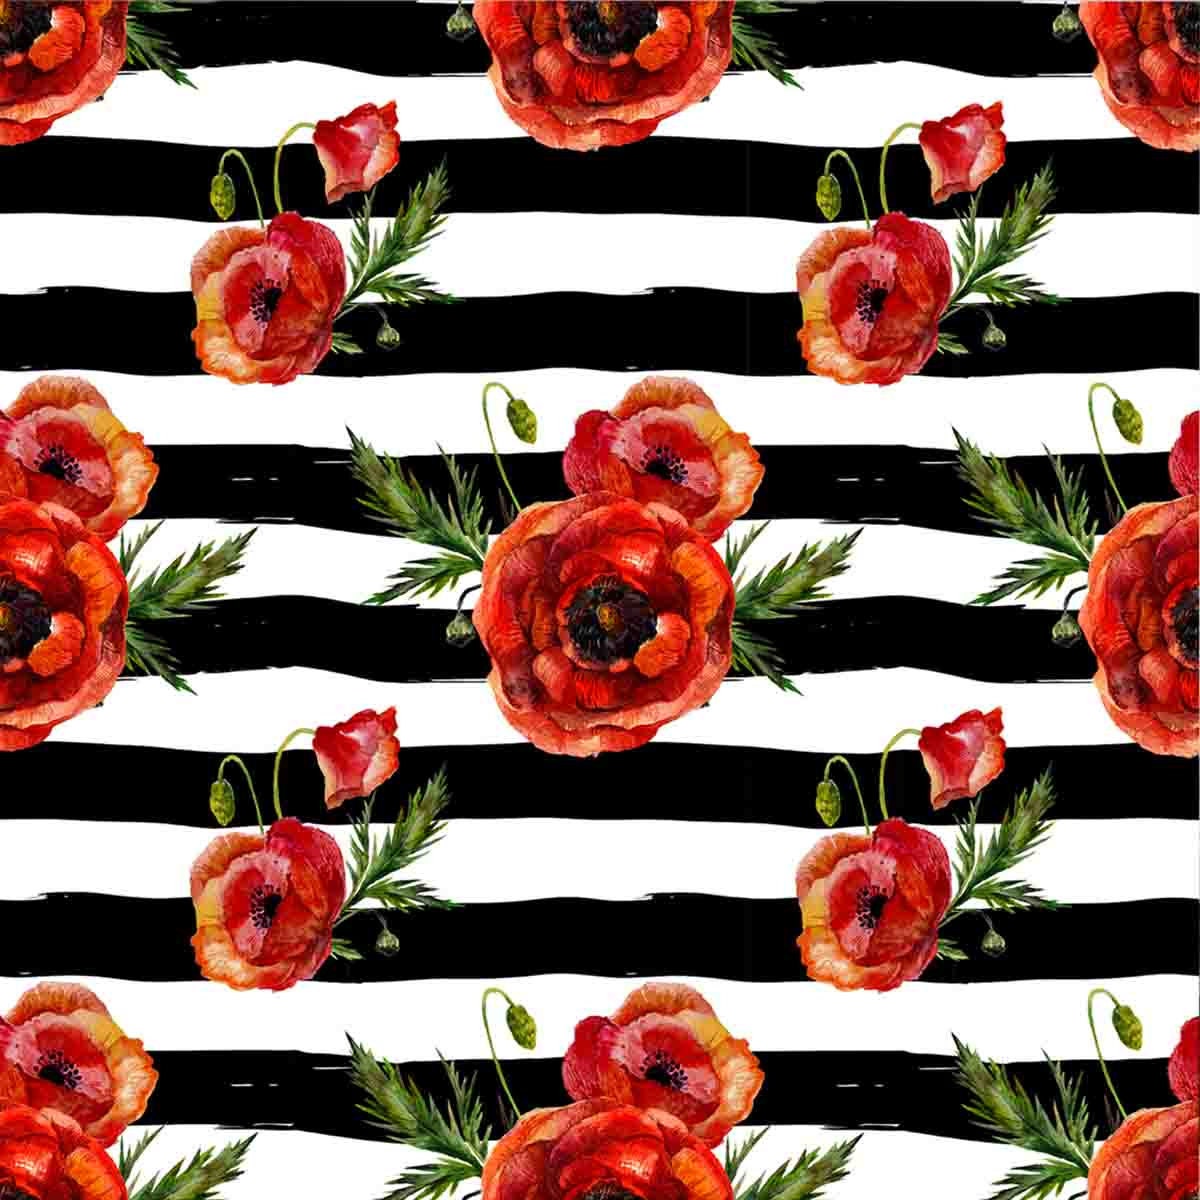 Retro Seamless Floral Pattern with Vintage Red Poppy Flower on Black Brush Stripes Background Wallpaper Living Room Mural